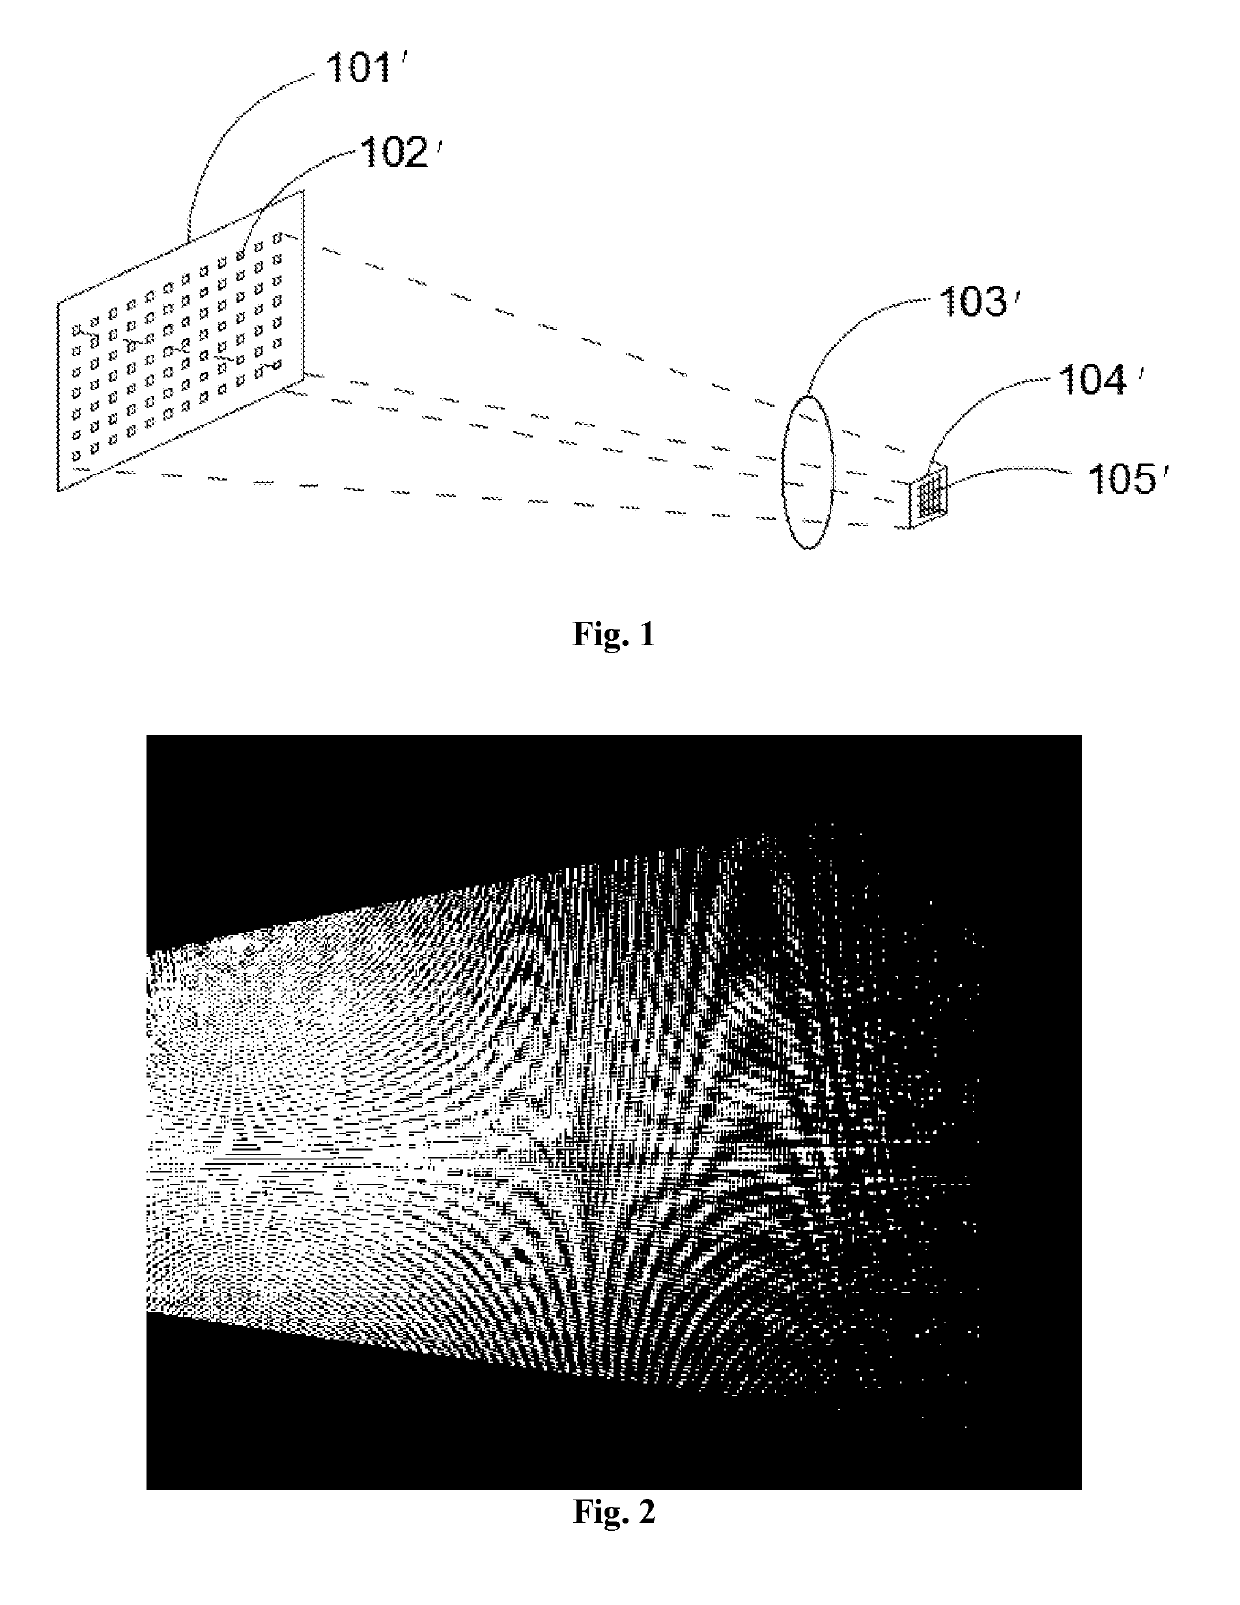 Image processing method and device for LED display screen